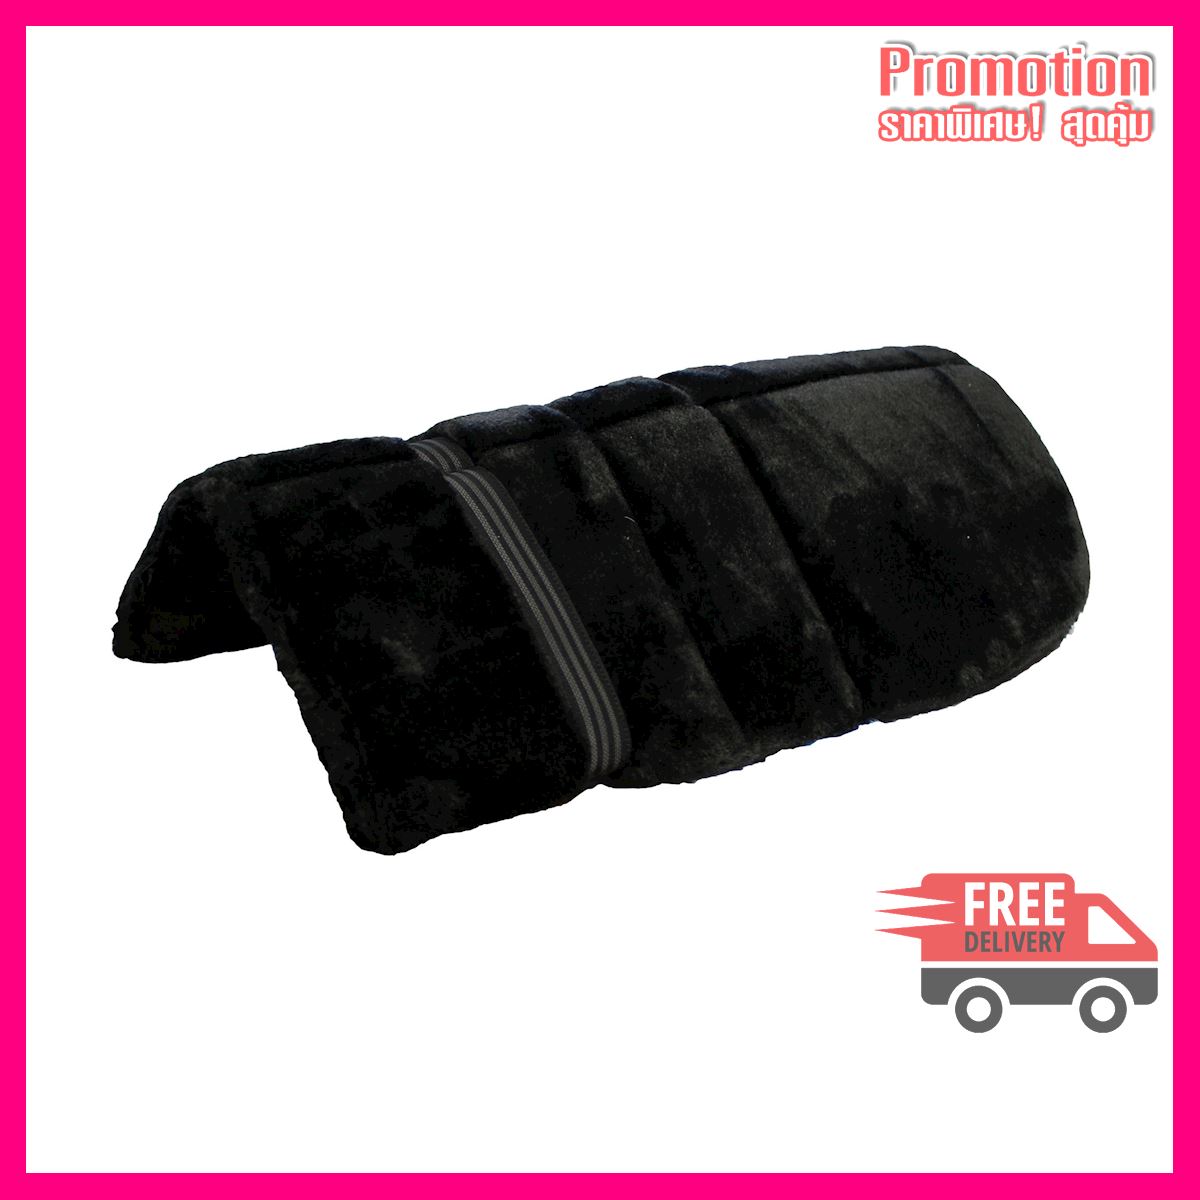 Schooling Horse Riding Foam Saddle Pad For Horse and Pony - Black